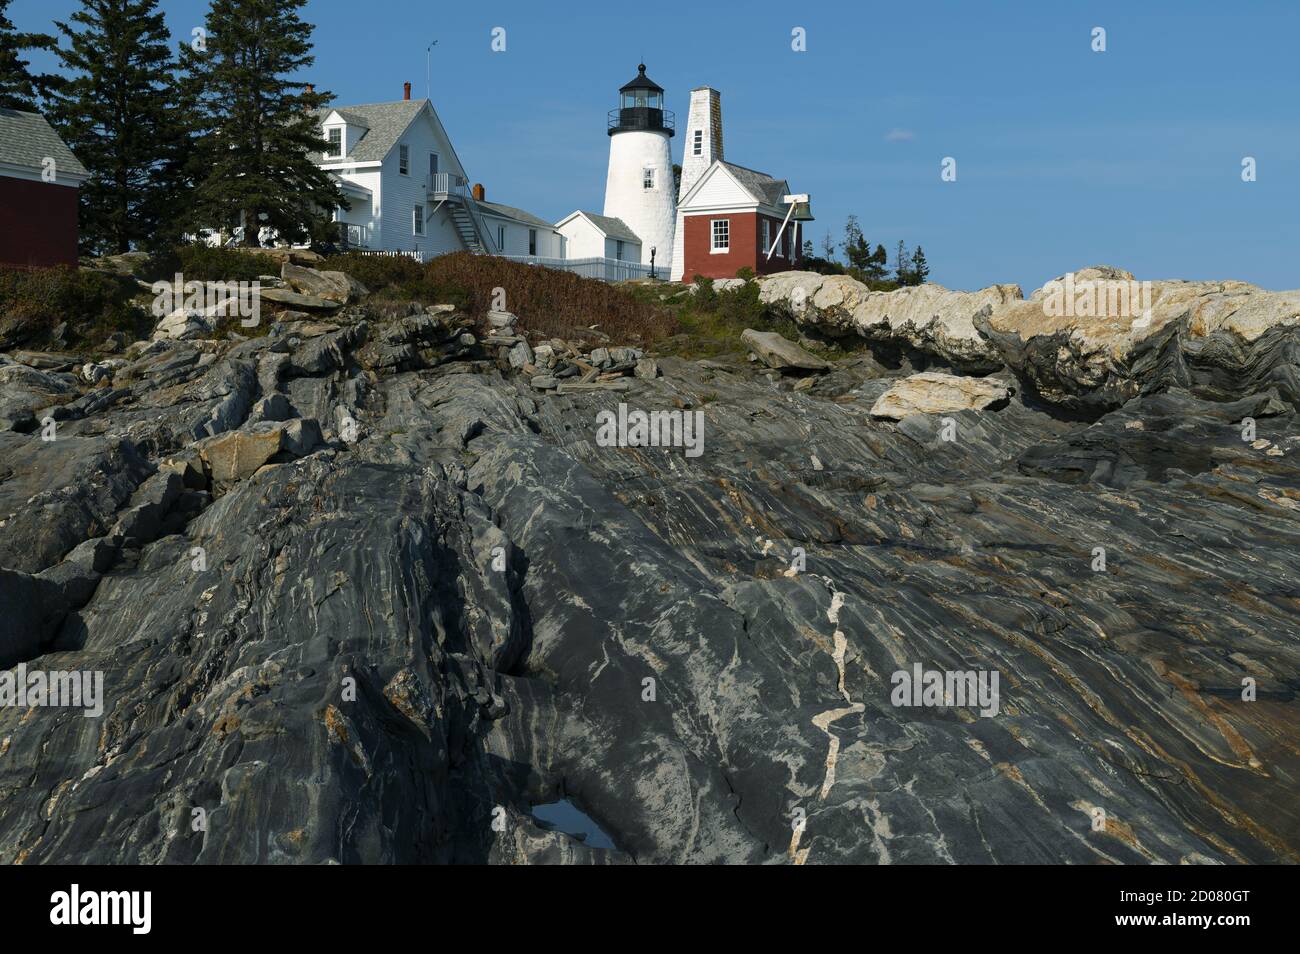 Pemaquid Point lighthouse is located on top of unique metamorphic rock formations in mid coast Maine. It is one of the most popular destinations. Stock Photo